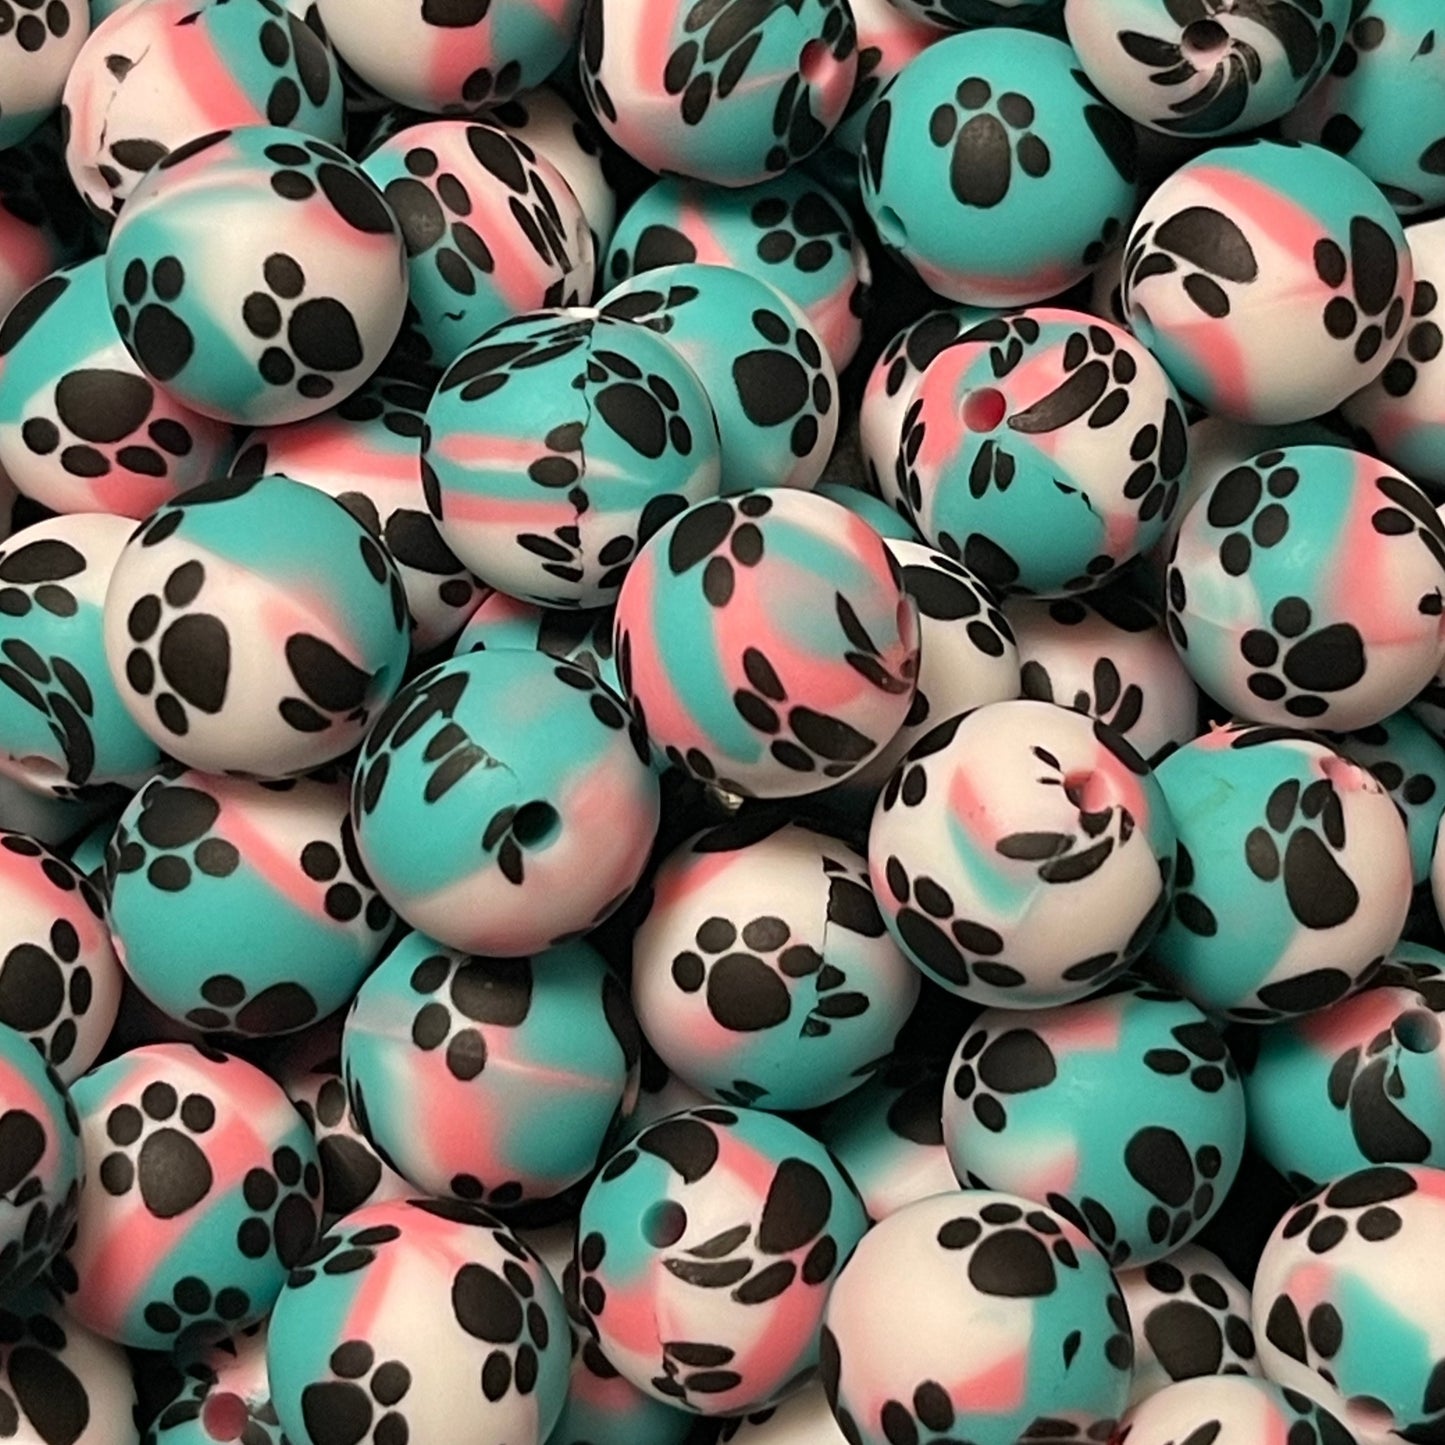 15mm Paws on Teal Swirl Silicone Bead